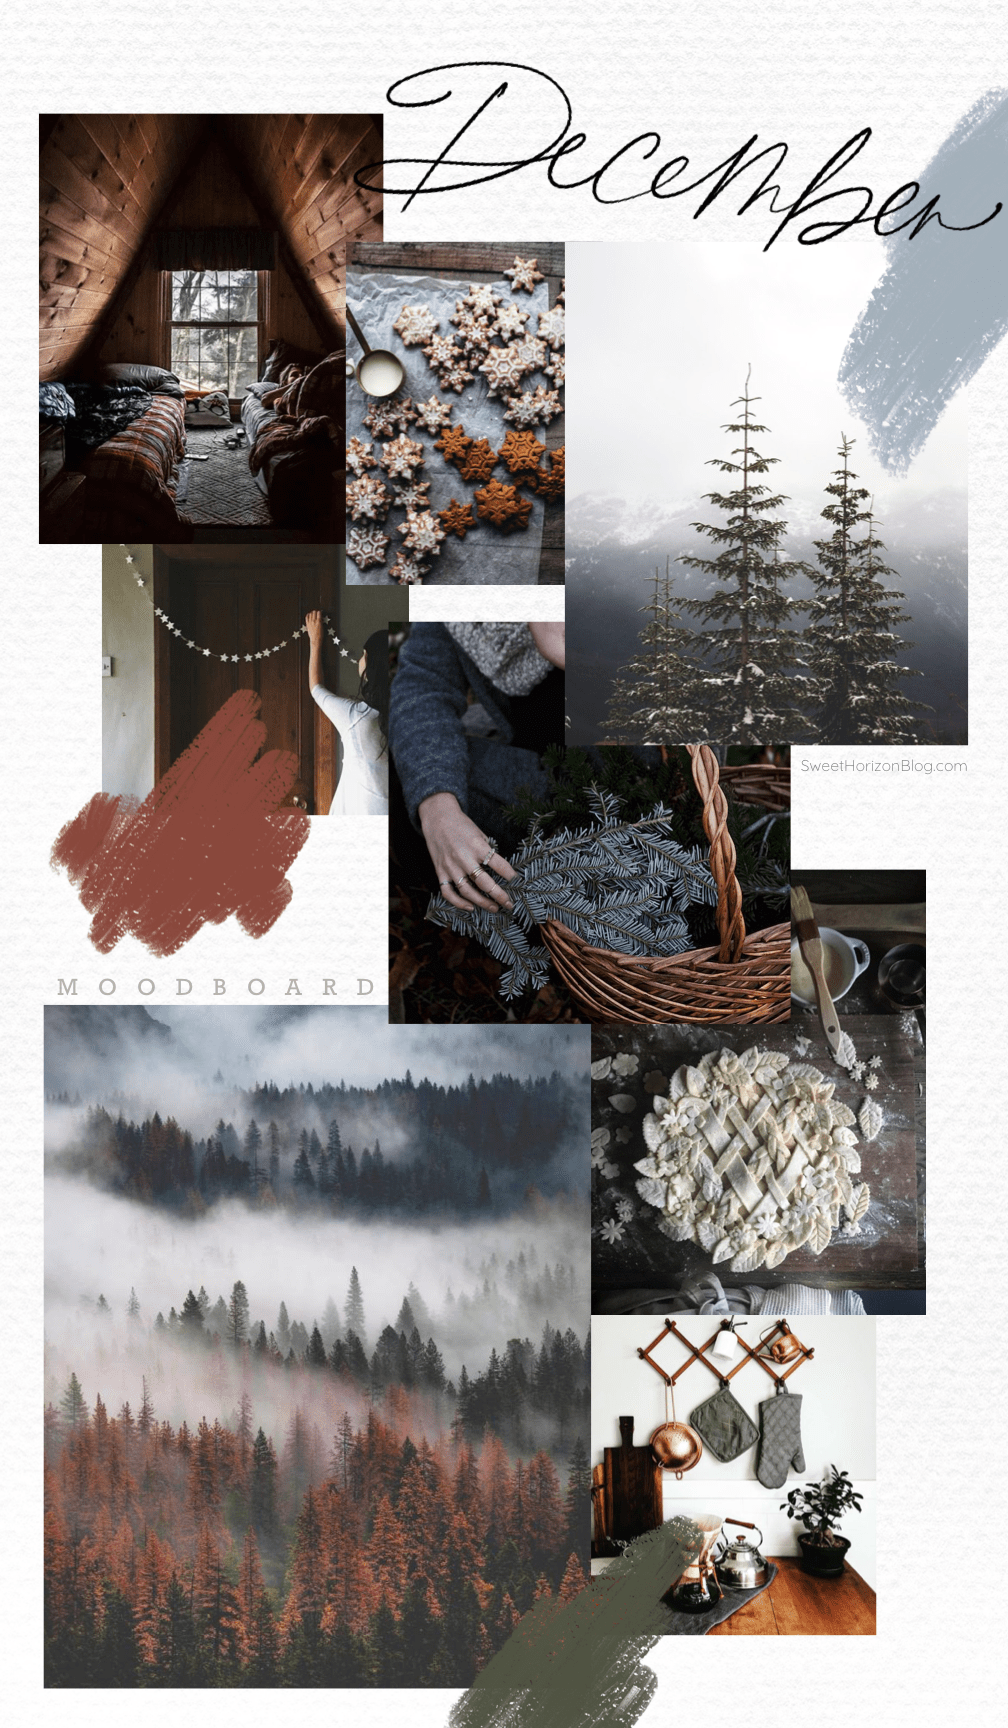 A mood board for December, featuring a forest, a cabin, and a winter scene. - December